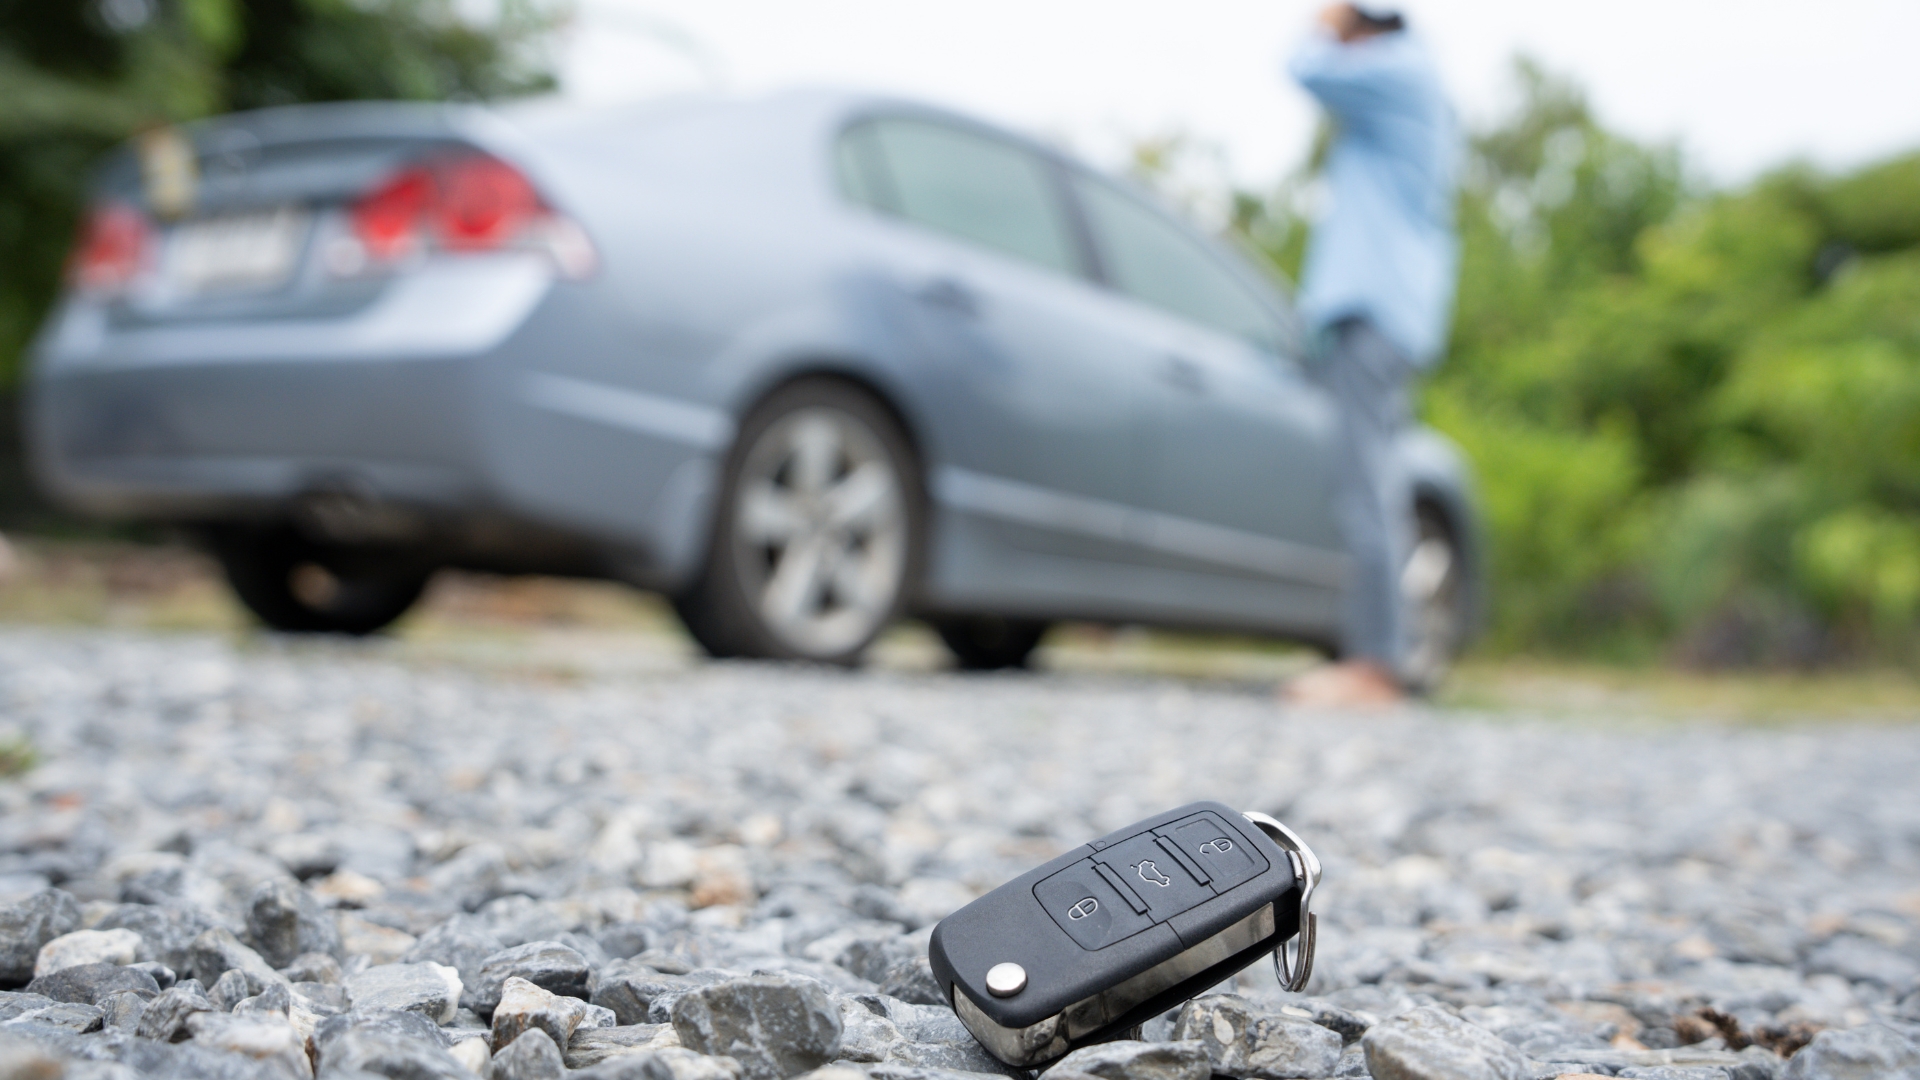 A car owner could not get into his car. In the foreground, his key fob is seen on the ground